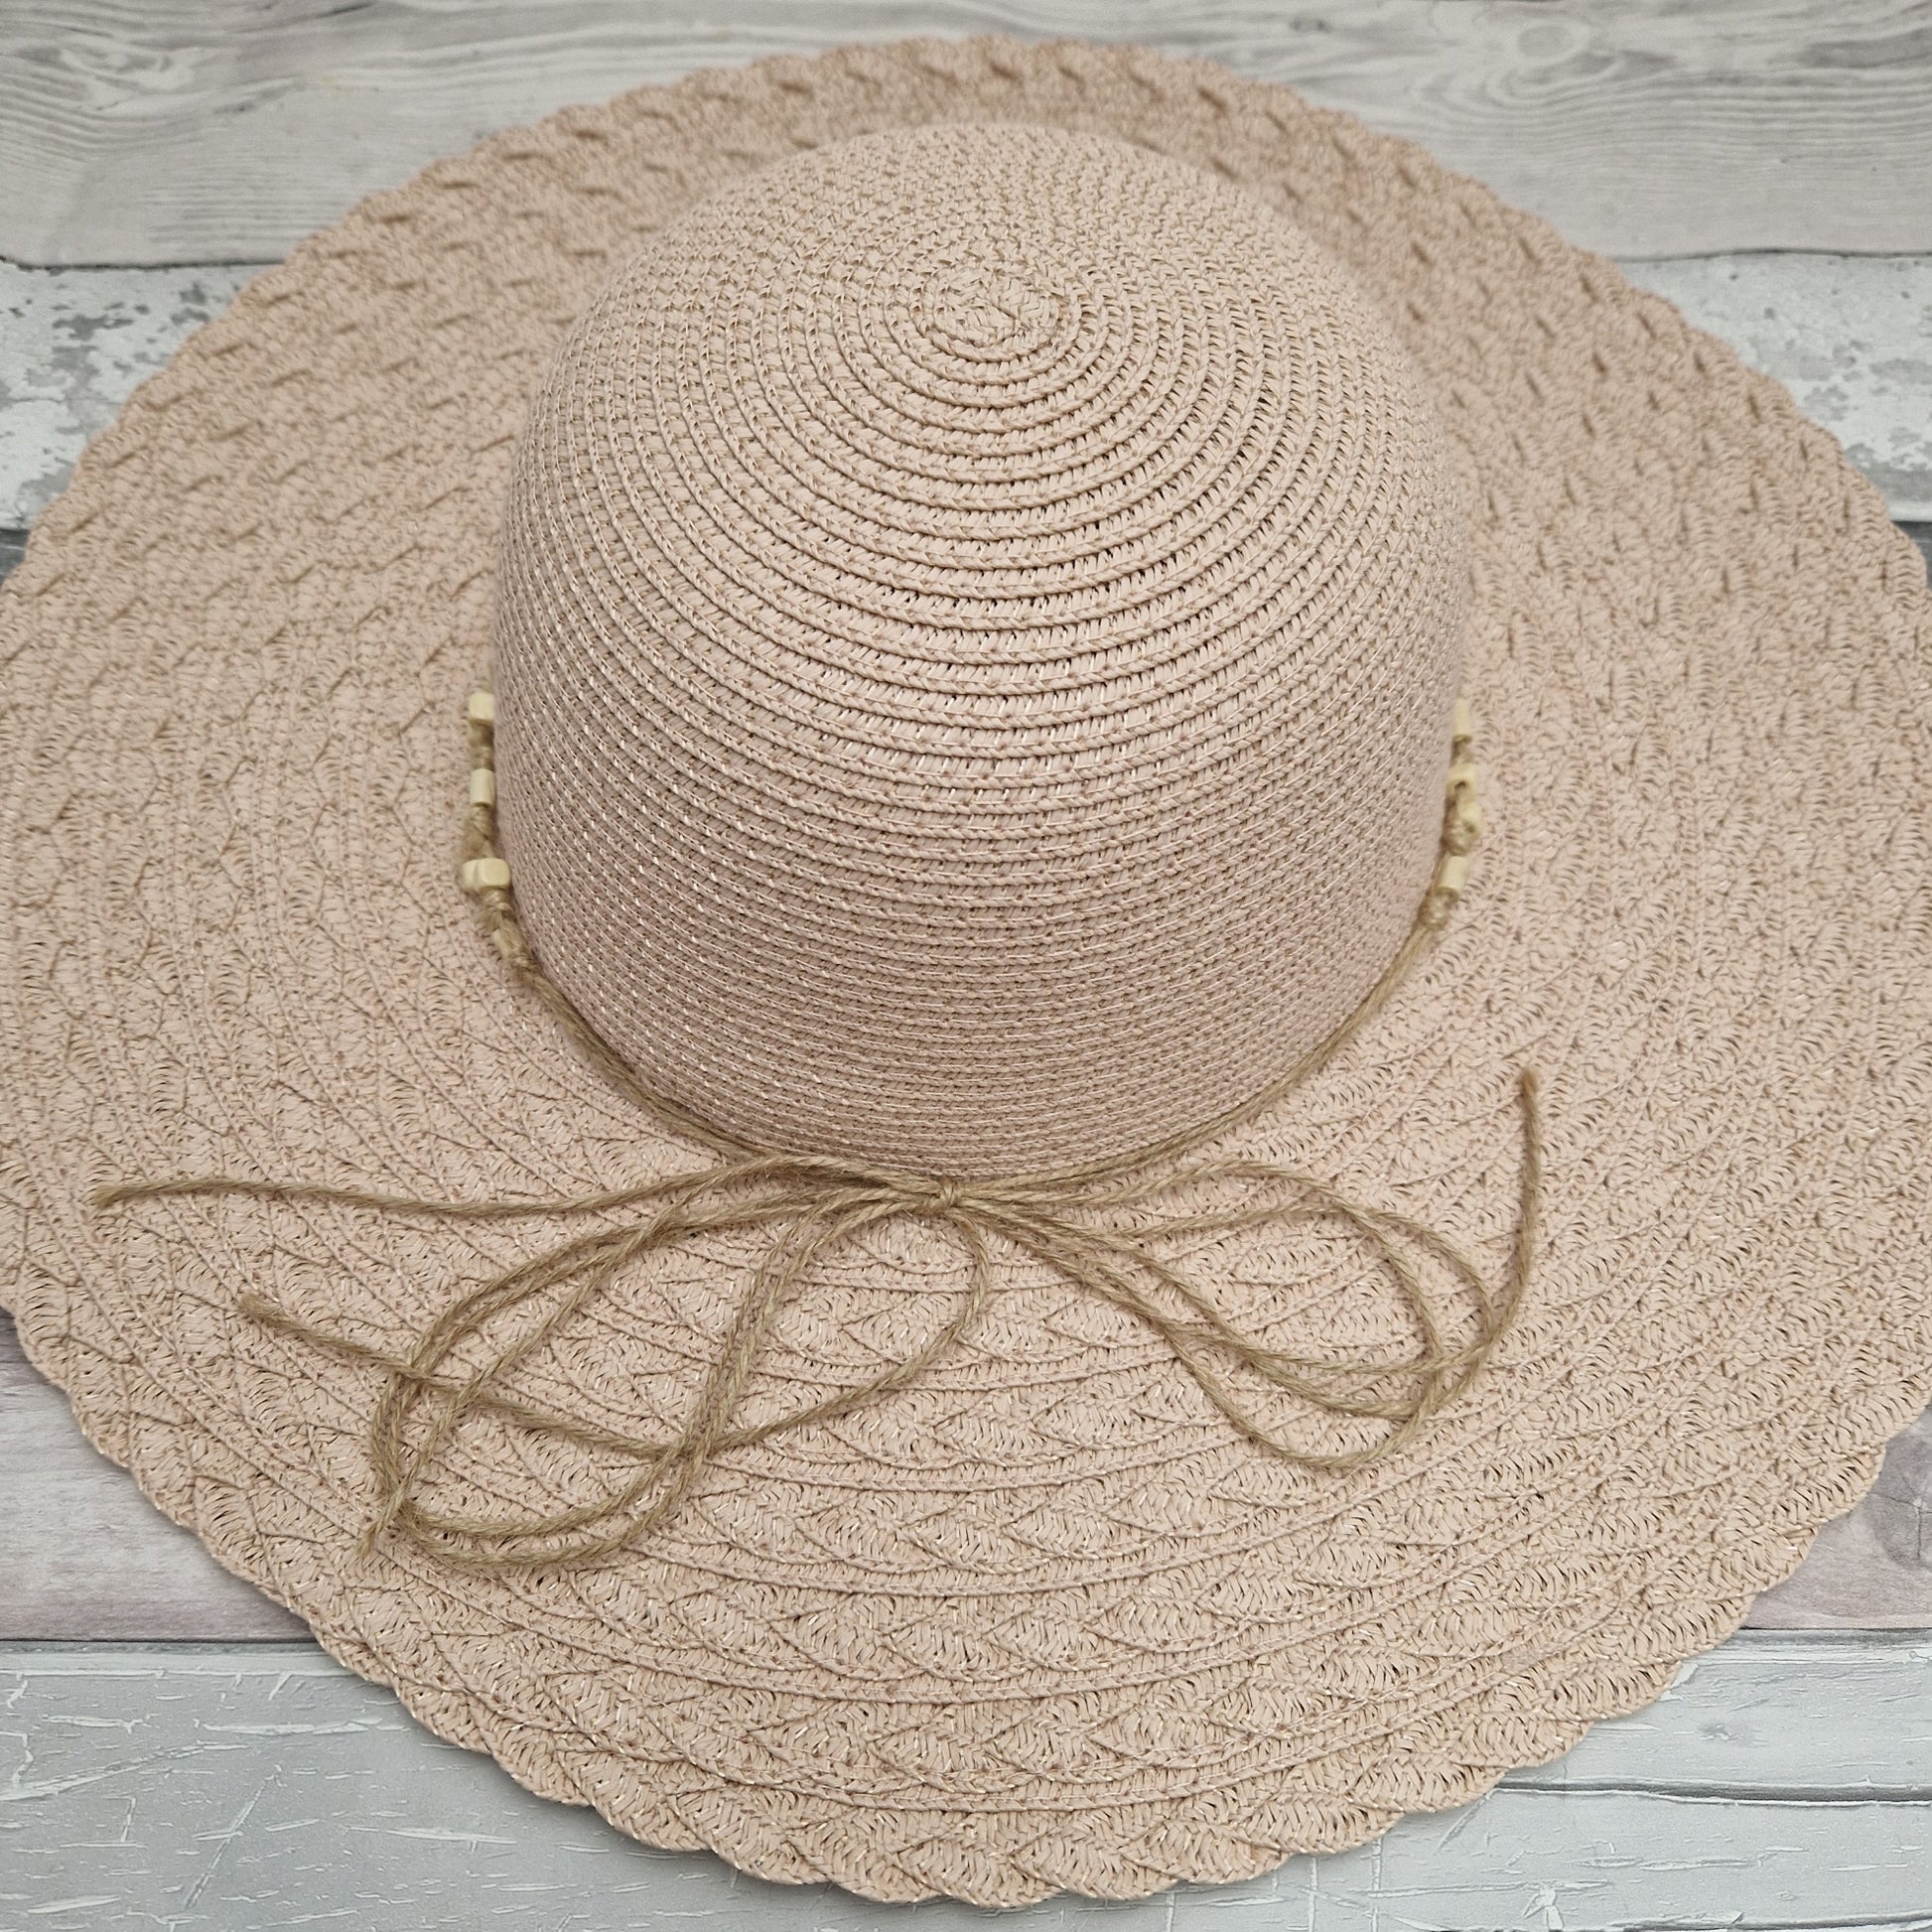 Pale pink wide brimmed hat with a beaded band.